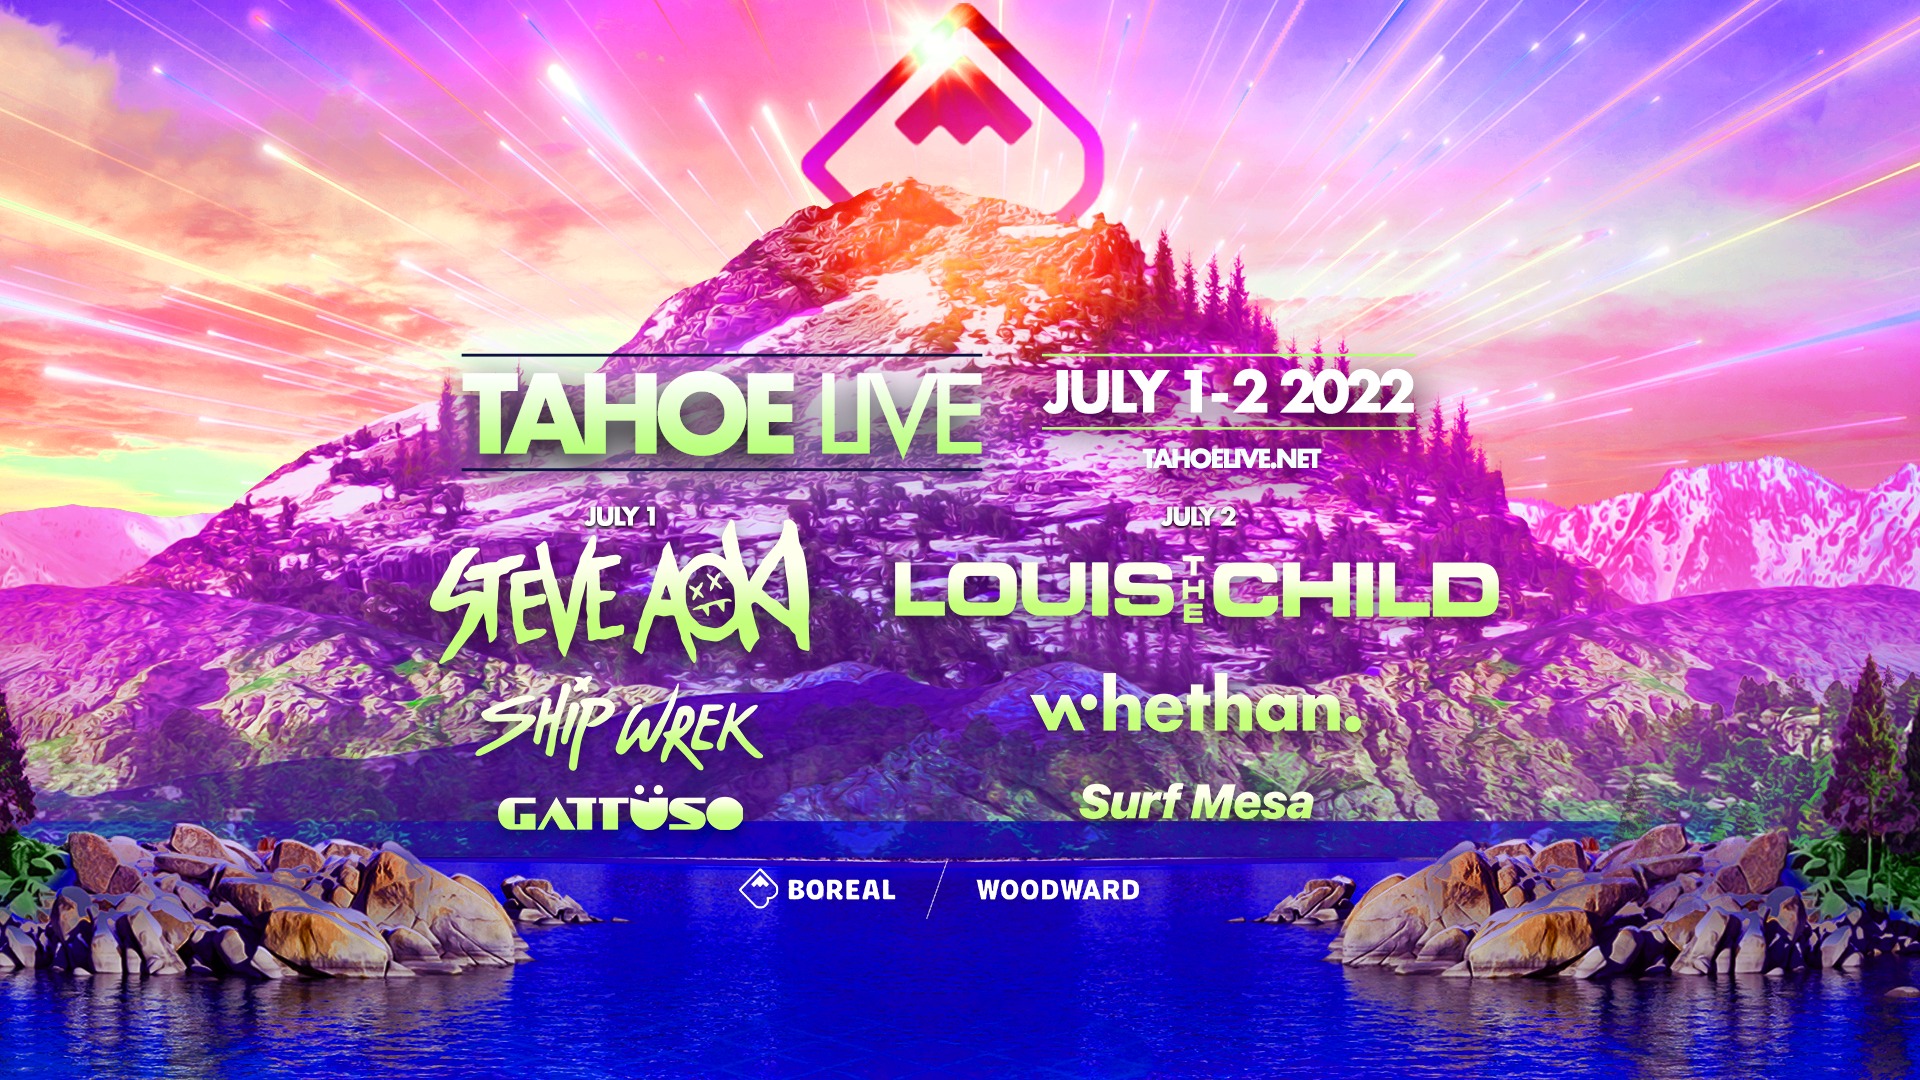 STEVE AOKI AND LOUIS THE CHILD TO HEADLINE 'TAHOE LIVE' INDEPENDENCE DAY WEEKEND CONCERT, JULY 01 & 02, 2022